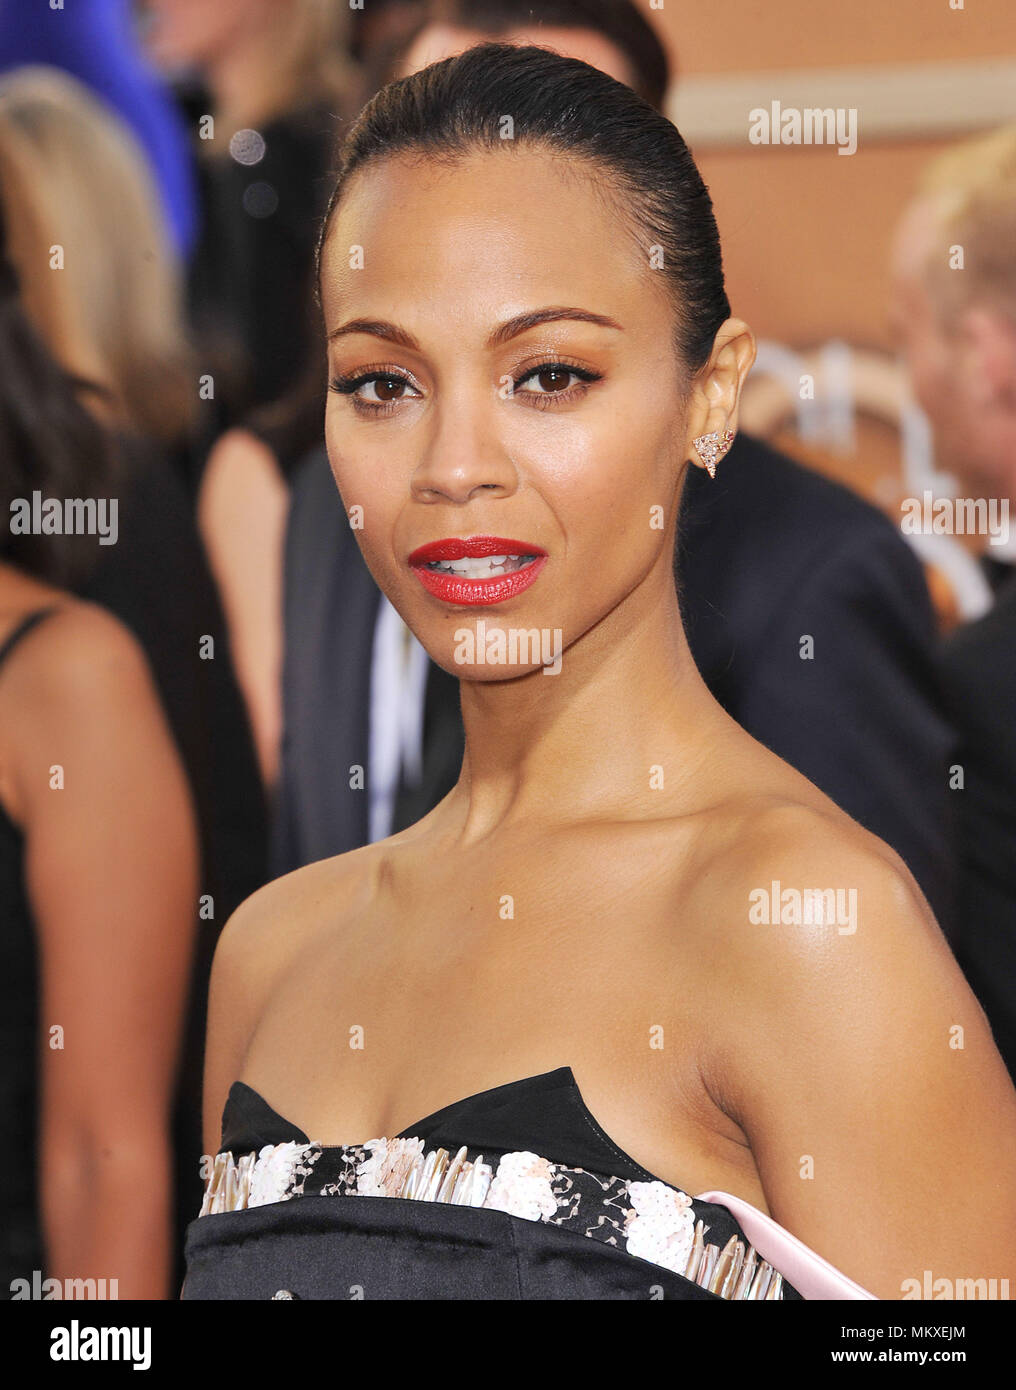 Zoe Saldana 366 at the 2014 Golden Globes Awards at the Beverly Hilton in Los Angeles.Zoe Saldana 366 Red Carpet Event, Vertical, USA, Film Industry, Celebrities,  Photography, Bestof, Arts Culture and Entertainment, Topix Celebrities fashion /  Vertical, Best of, Event in Hollywood Life - California,  Red Carpet and backstage, USA, Film Industry, Celebrities,  movie celebrities, TV celebrities, Music celebrities, Photography, Bestof, Arts Culture and Entertainment,  Topix, headshot, vertical, one person,, from the year , 2014, inquiry tsuni@Gamma-USA.com Stock Photo